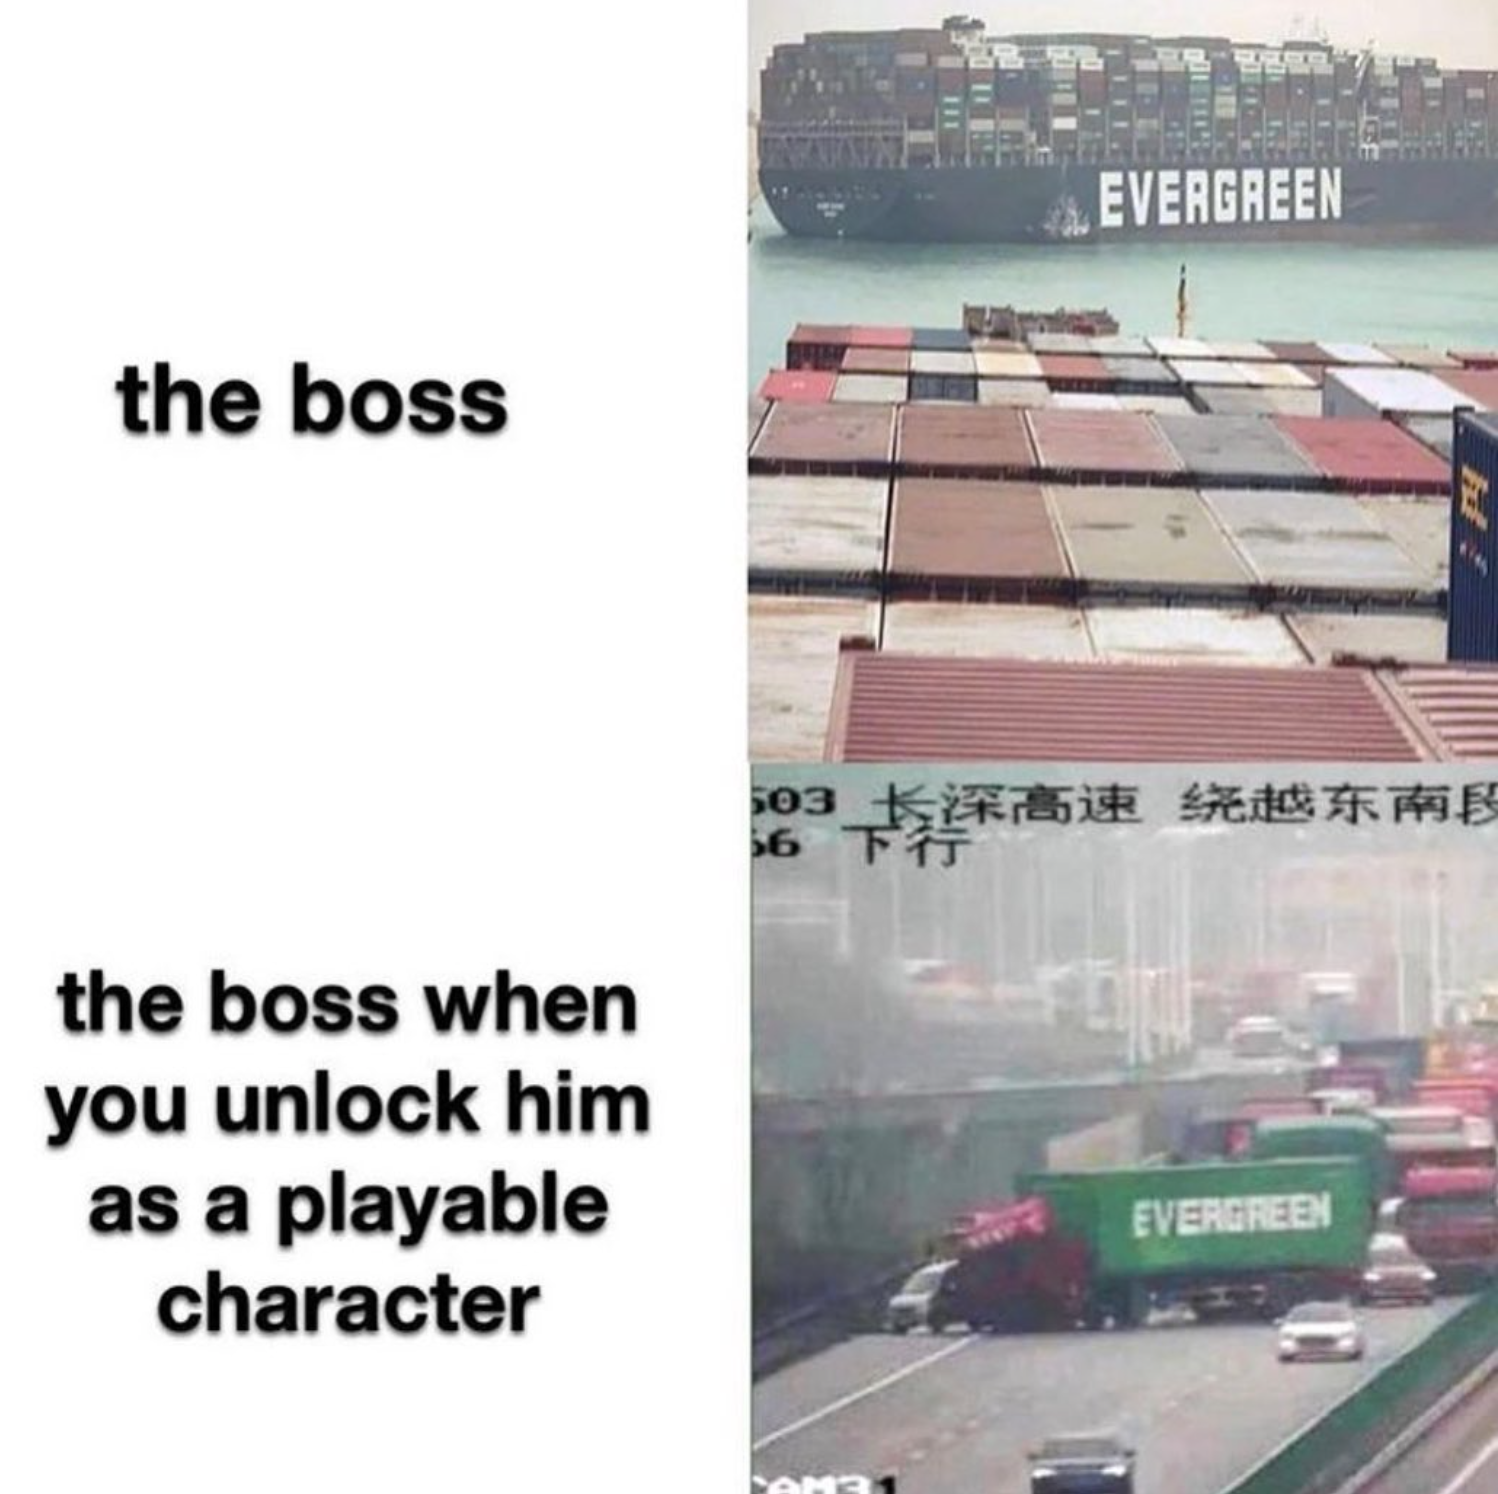 funny gaming memes - you break it you buy - Evergreen the boss 03 56 Fit the boss when you unlock him as a playable character Evergreen